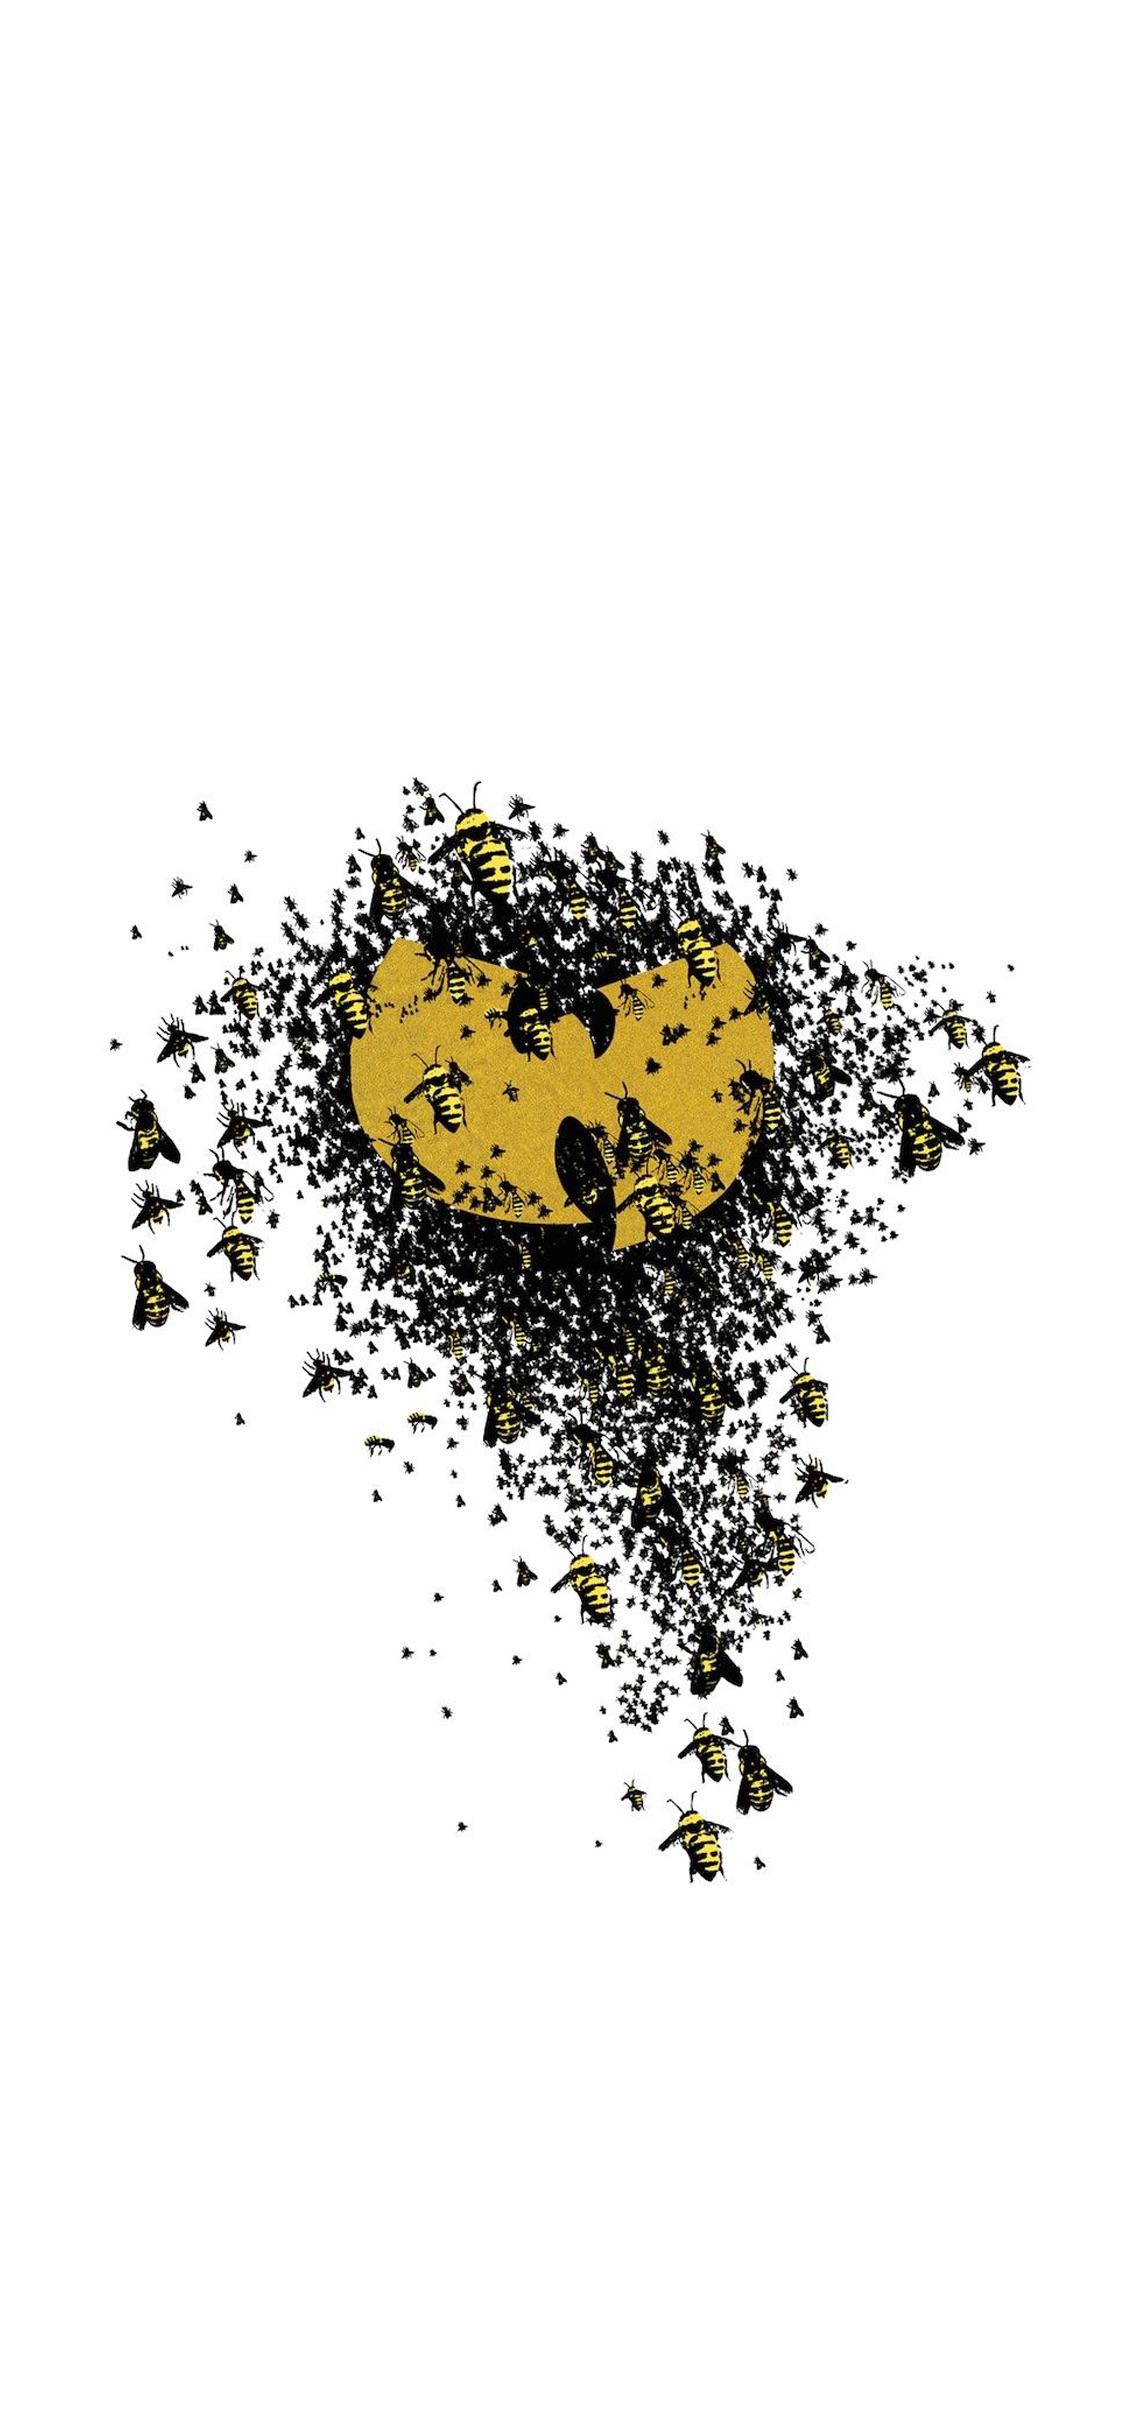 Wu-tang Art, Cropped, Chopped And Edited For The Iphone - Wu Tang Killa Beez , HD Wallpaper & Backgrounds